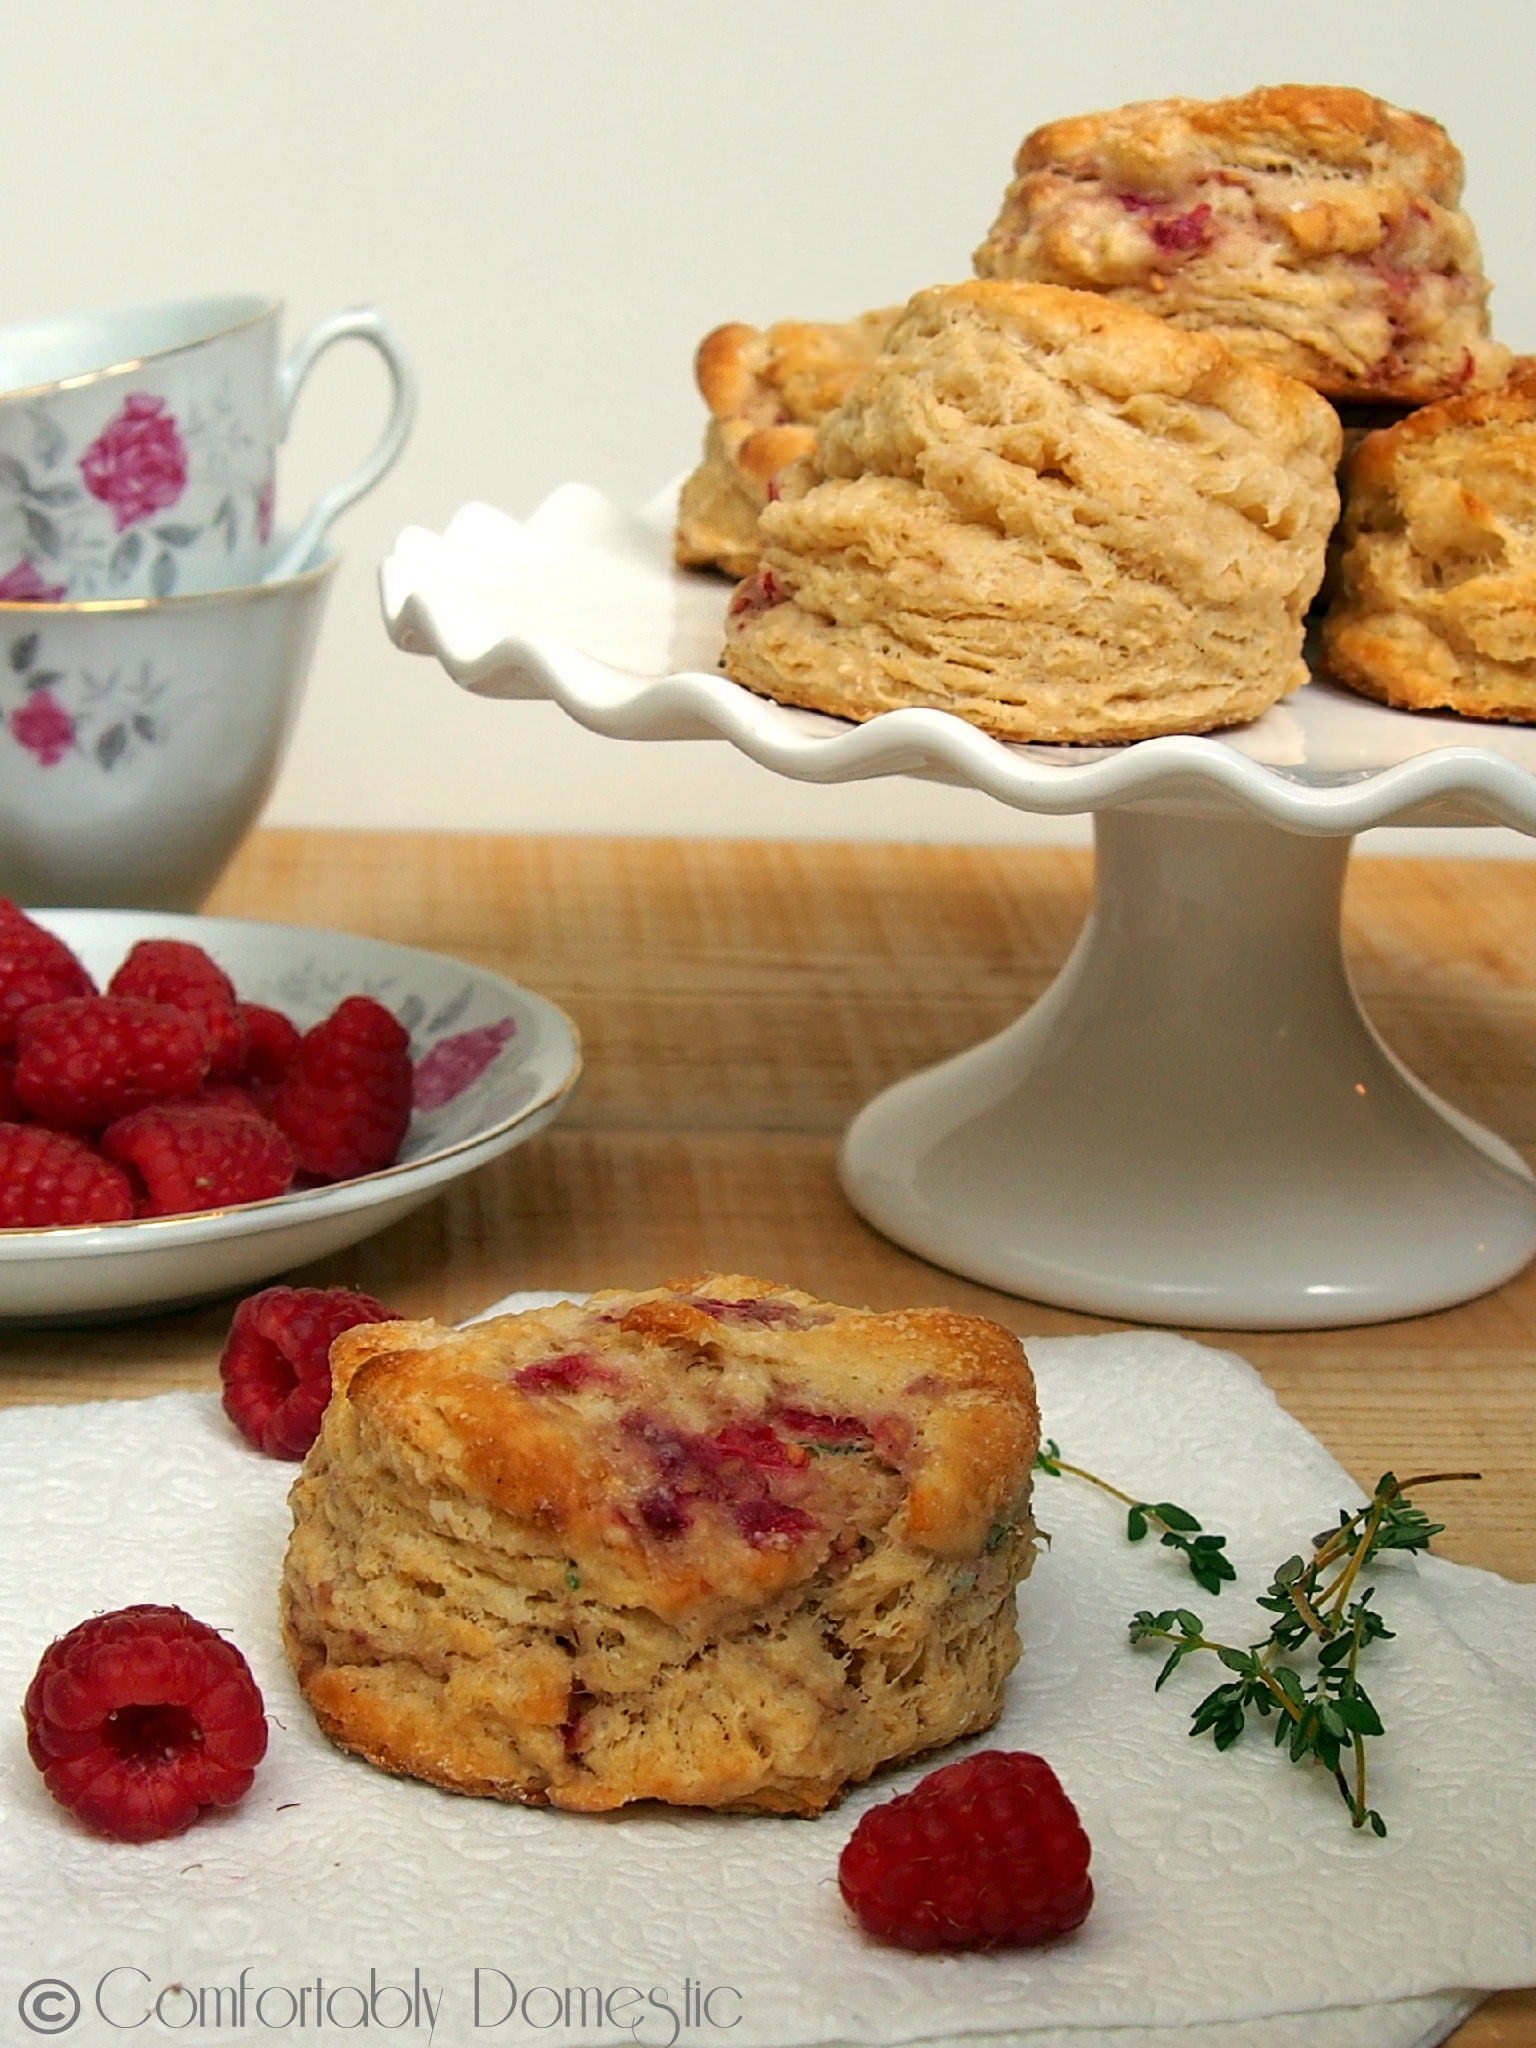 Raspberry thyme goat cheese biscuits are the perfect treat with a hot cup of coffee or afternoon tea. Tender and flaky, with just the right touch of raspberry sweetness to compliment the thyme and creamy goat cheese. | ComfortablyDomestic.com